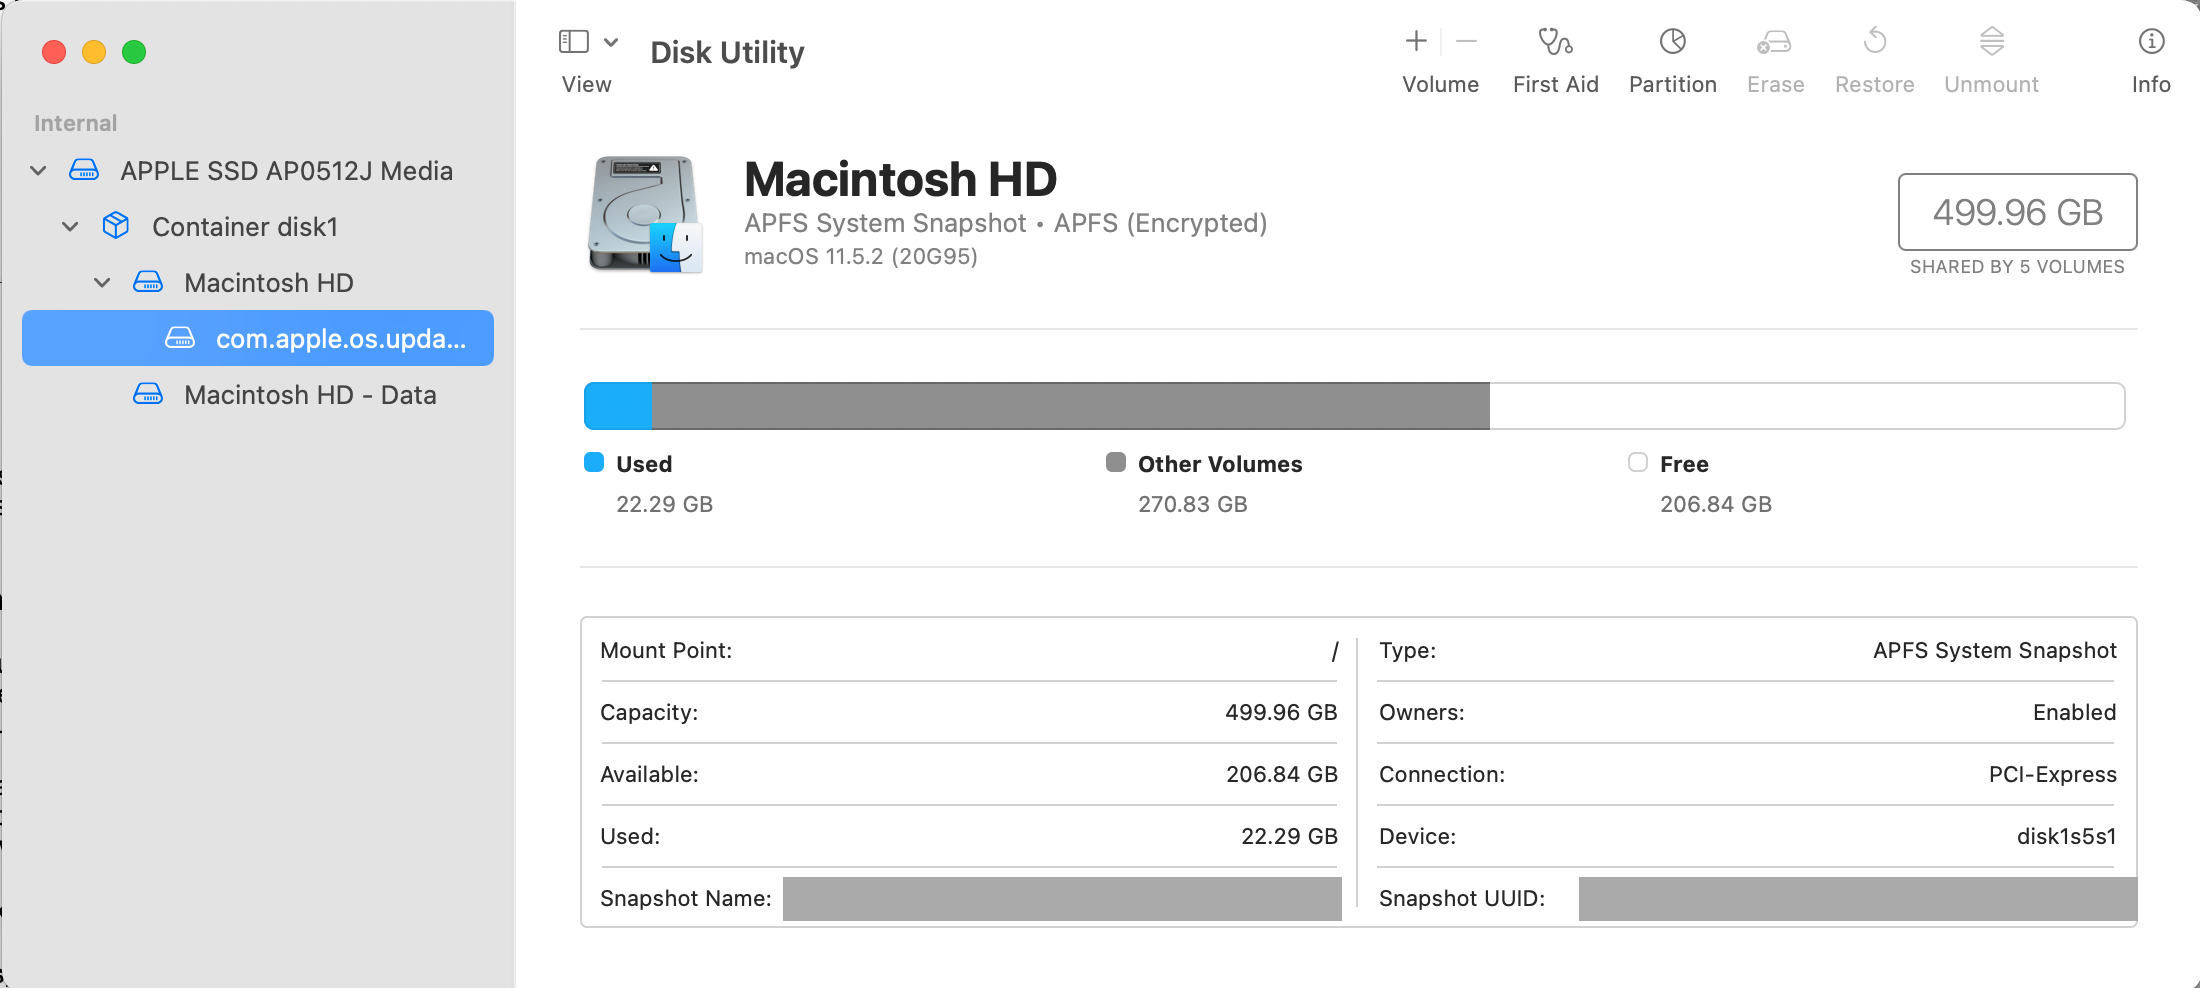 Disk Utility open on a MacBook Pro